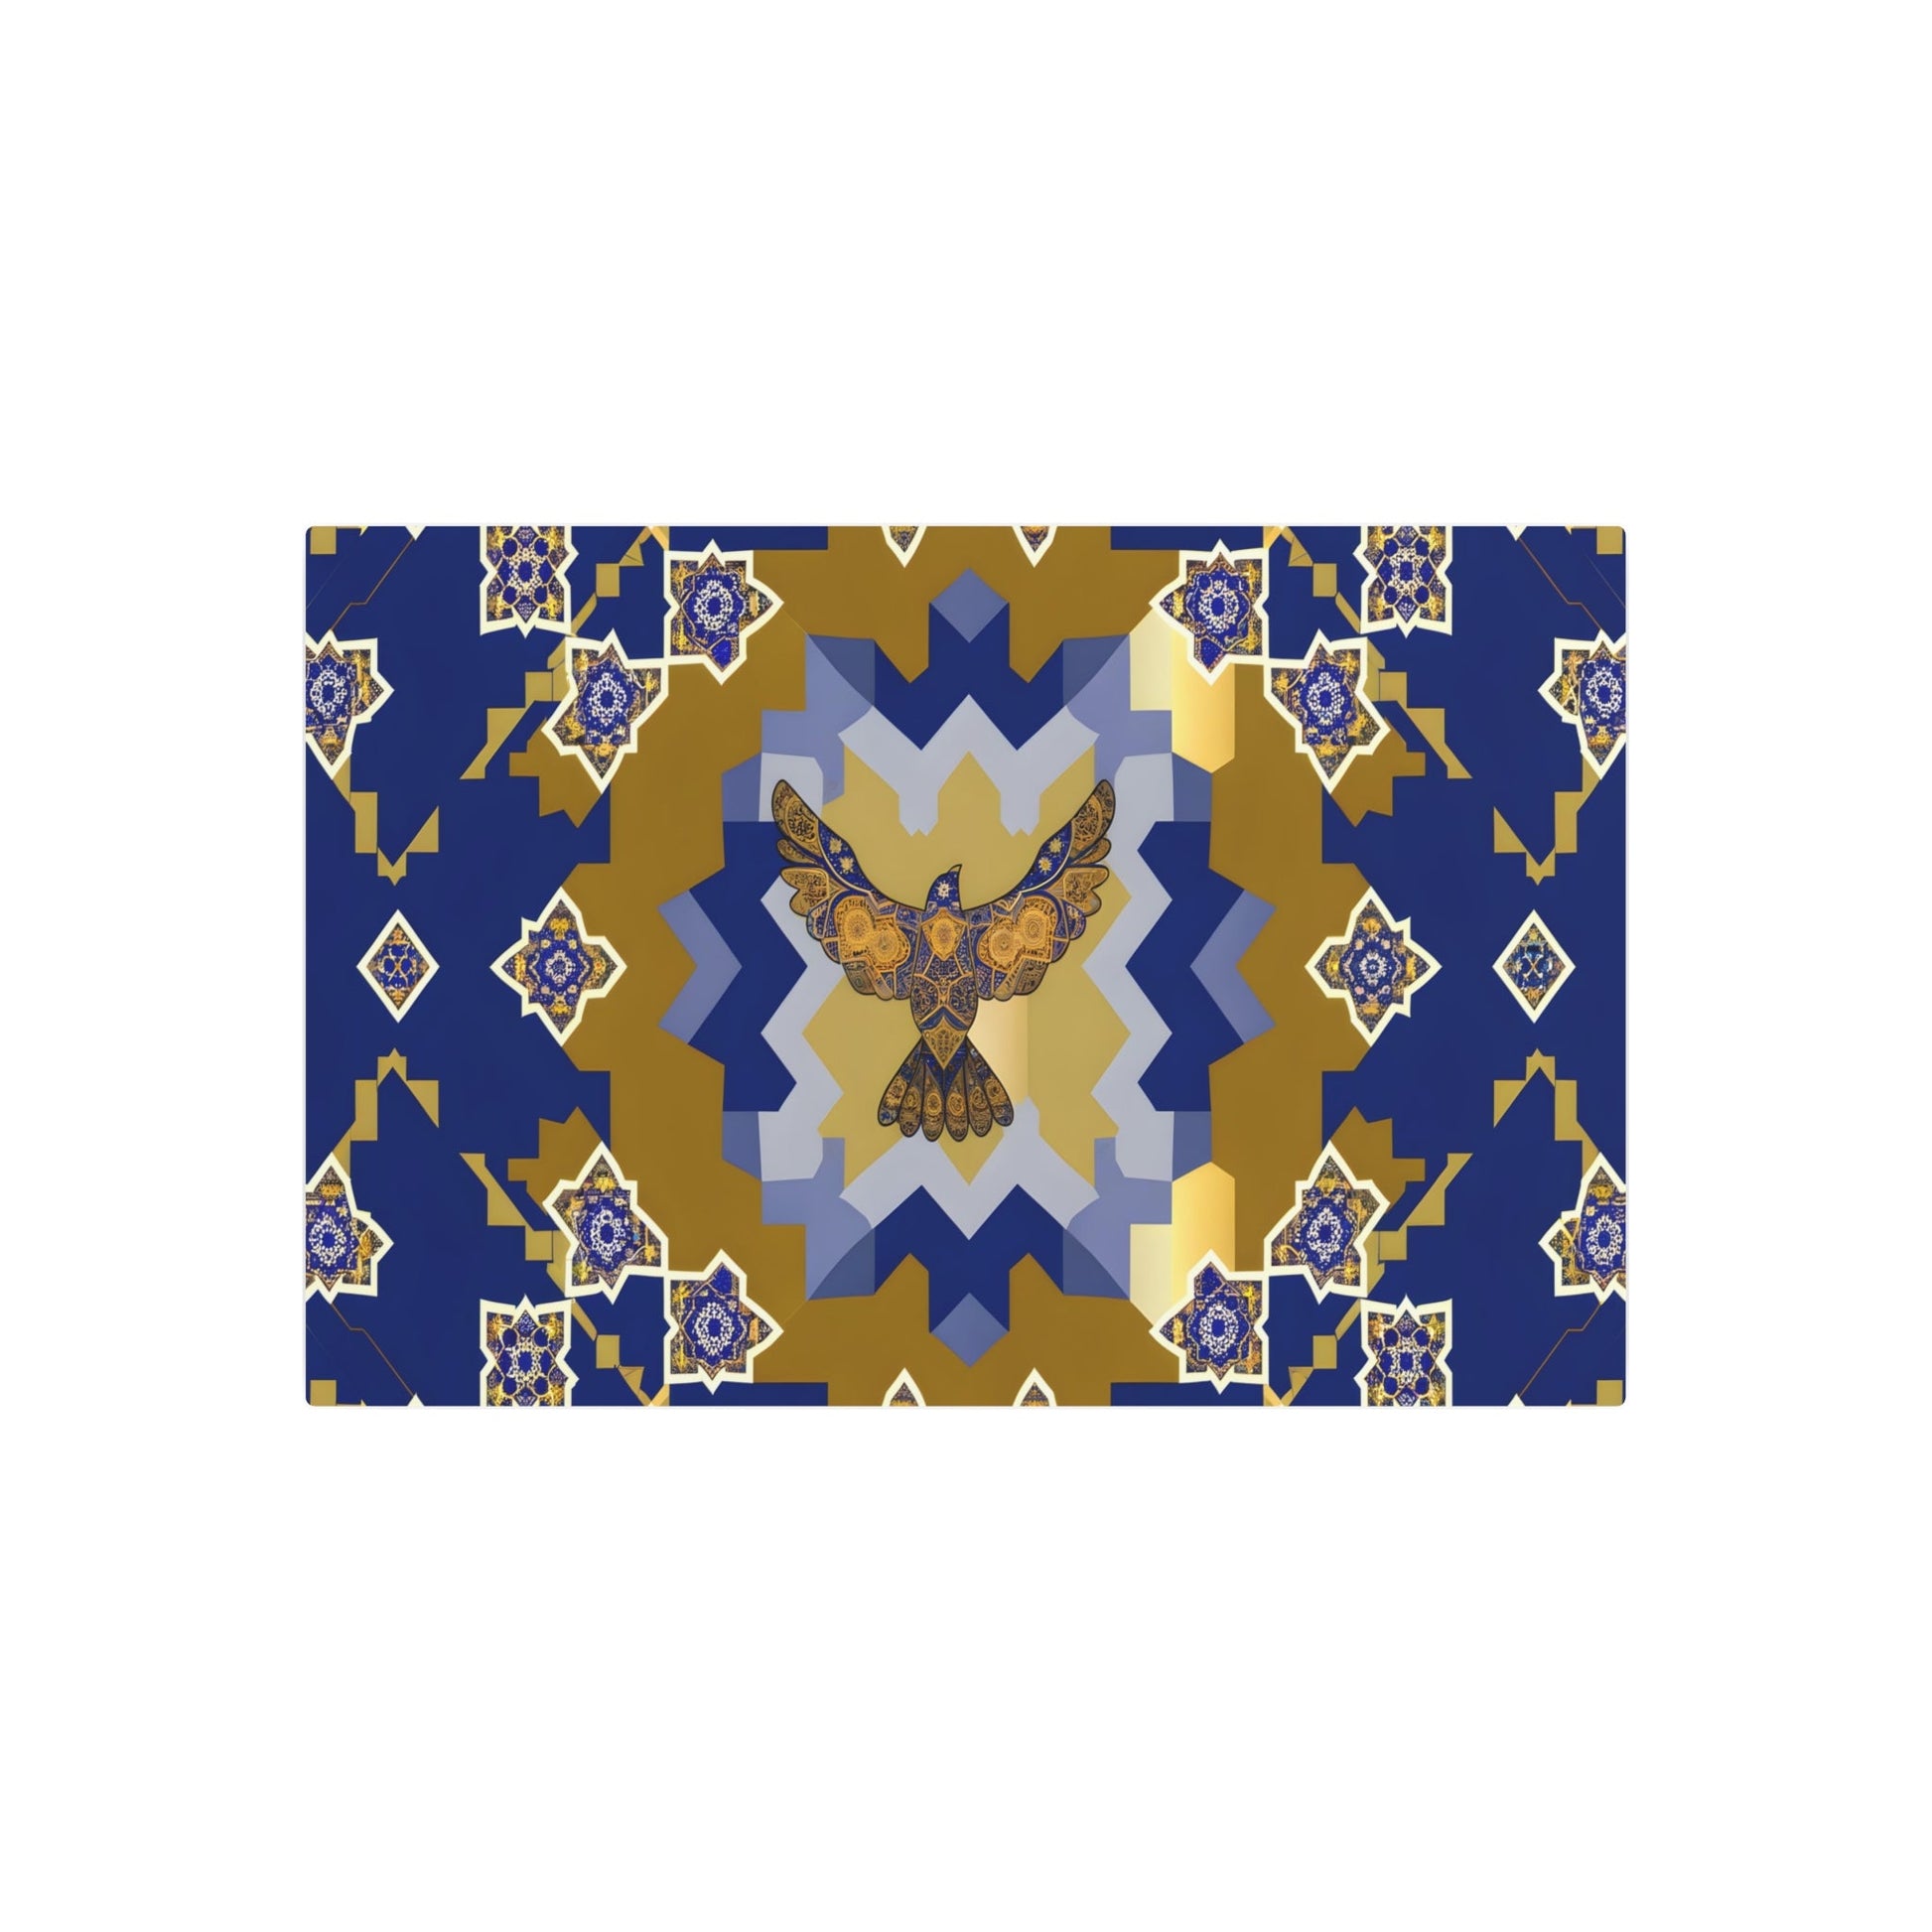 Metal Poster Art | "Authentic Islamic Geometric Artwork Featuring Detailed Bird Design in Rich Blues, Golds, and Whites - Non-Western & Global Styles Collection" - Metal Poster Art 36″ x 24″ (Horizontal) 0.12''